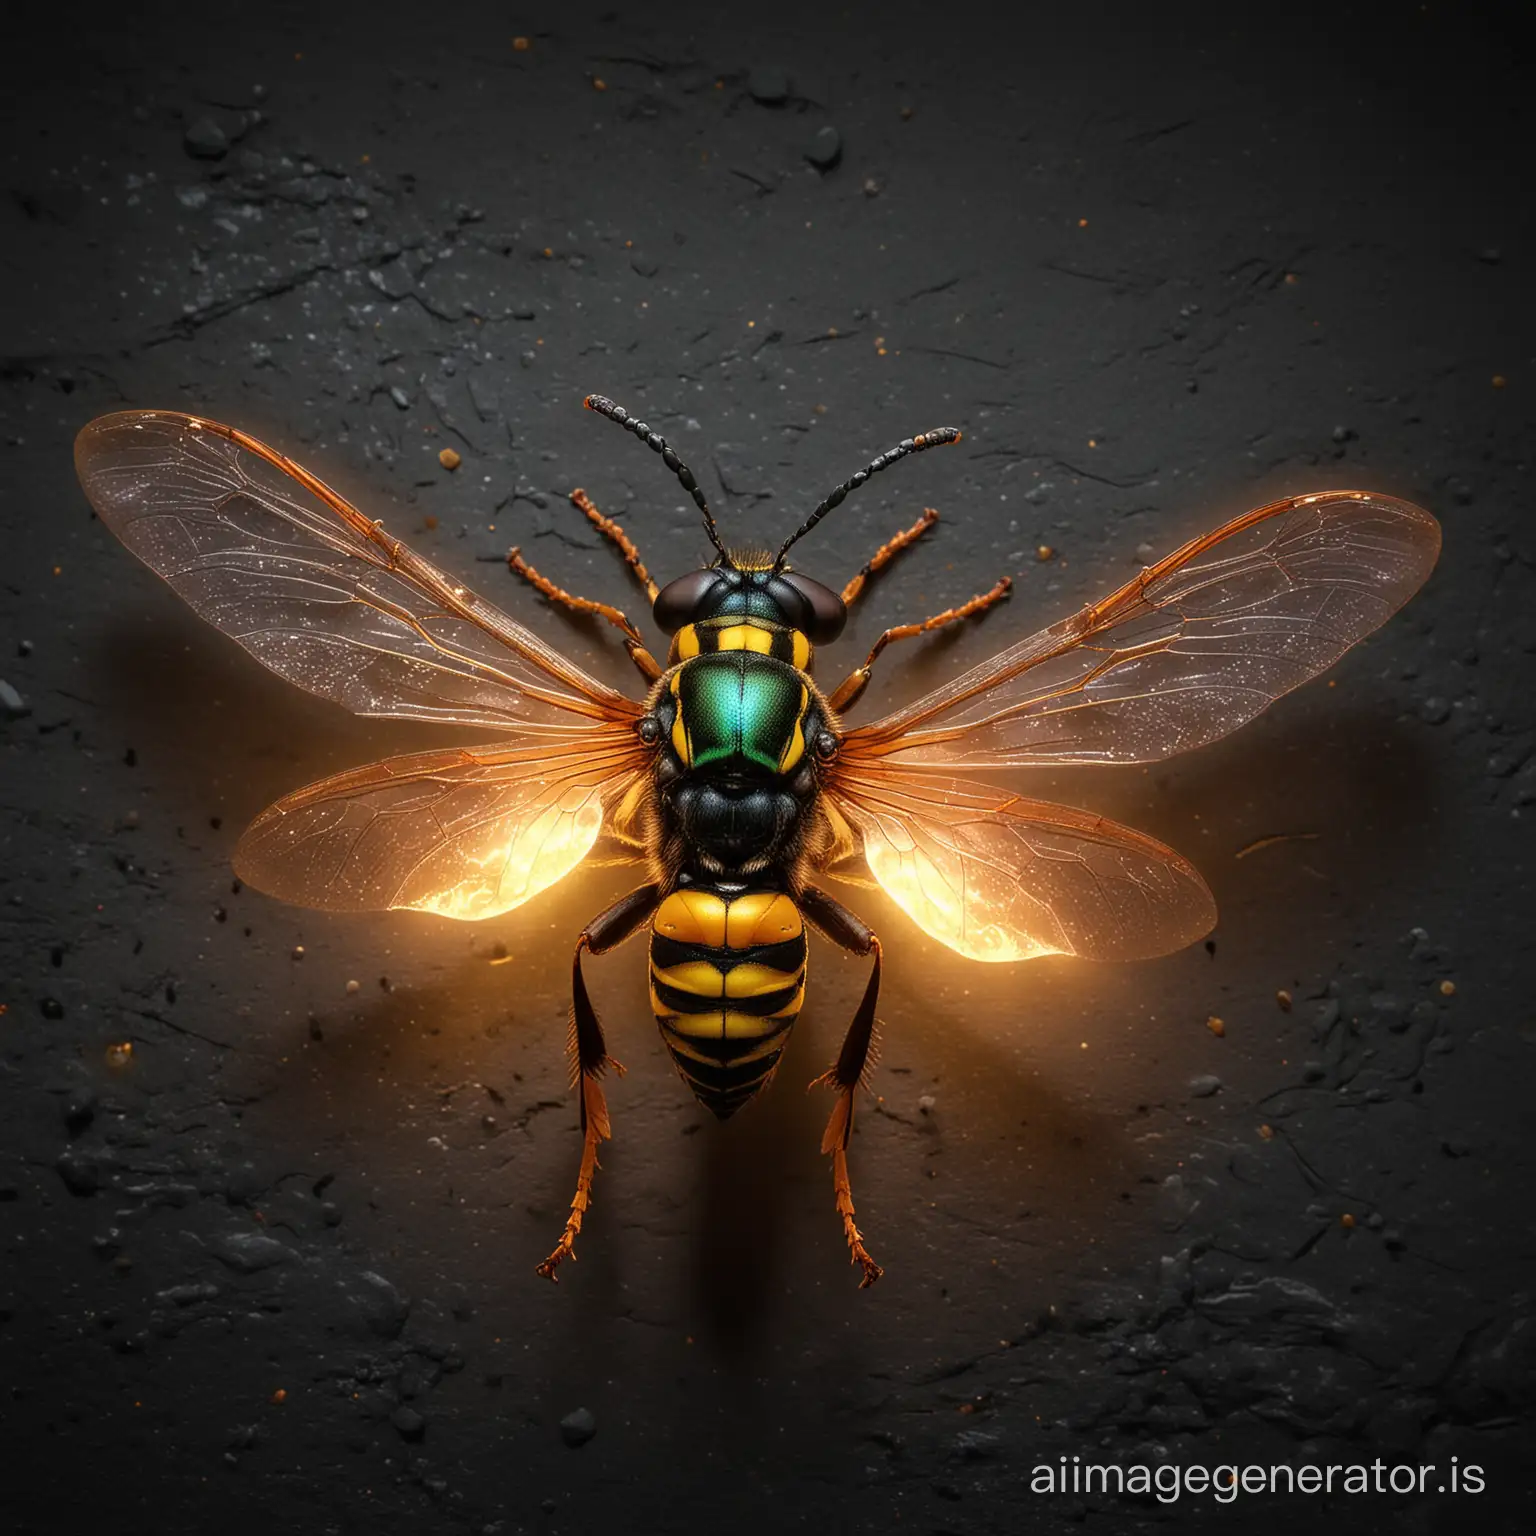 A stunning 3D render of a colorful wasp lying on a dark concrete flat ground with a fiery translucent glow emanating from its body, creating a mesmerizing spectacle. The insect appears to be a wasp with vibrant hues of green, orange, blue, yellow and red eyes. The close-up shot allows us to appreciate the intricate details of this fascinating creature while we can see the whole insect and its wings, showcasing its shiny, bright and bioluminescent body. The lighting in the image enhances the luminosity of wasp, creating a striking contrast against the black background. This captivating scene is reminiscent of a magical and mystical creature from a fantasy realm.